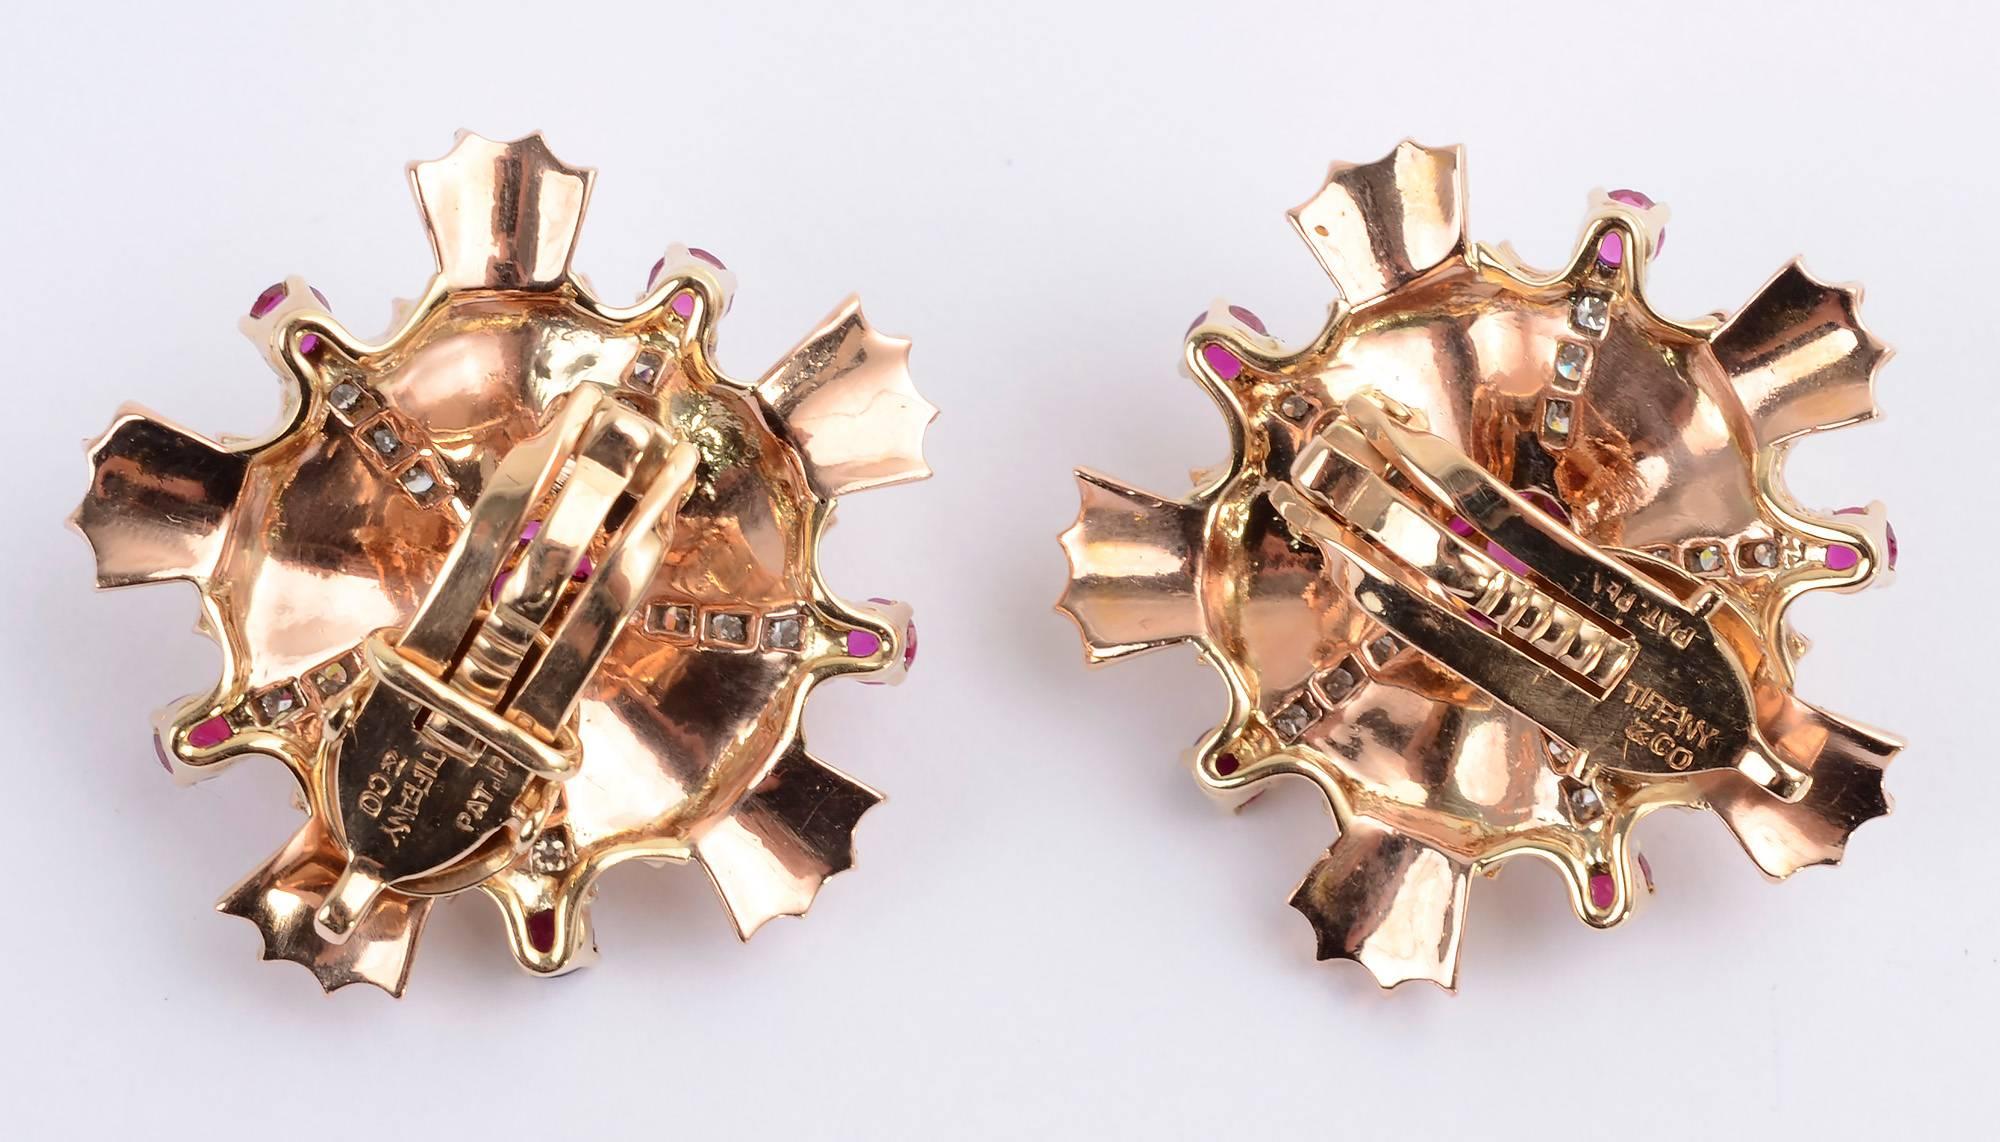 Festive Retro Starburst earrings by Tiffany and Co. They are centered with a cluster of rubies that are continued on five tips. Five rays of diamonds add additional sparkle. Backs are clips. They are 14 karat pink gold.